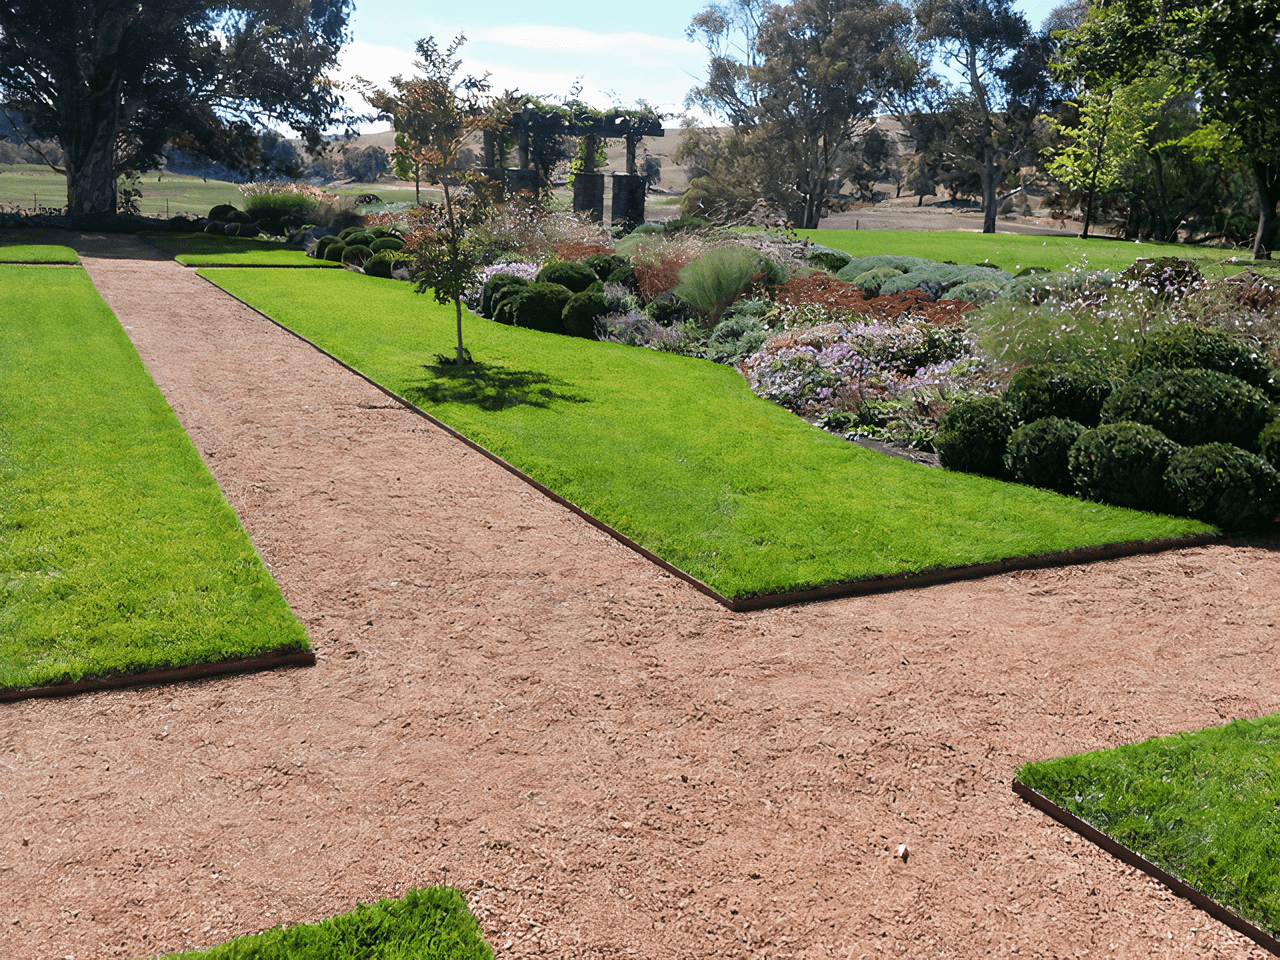 Perfect lawn and edging by Dan and Dan Landscaping